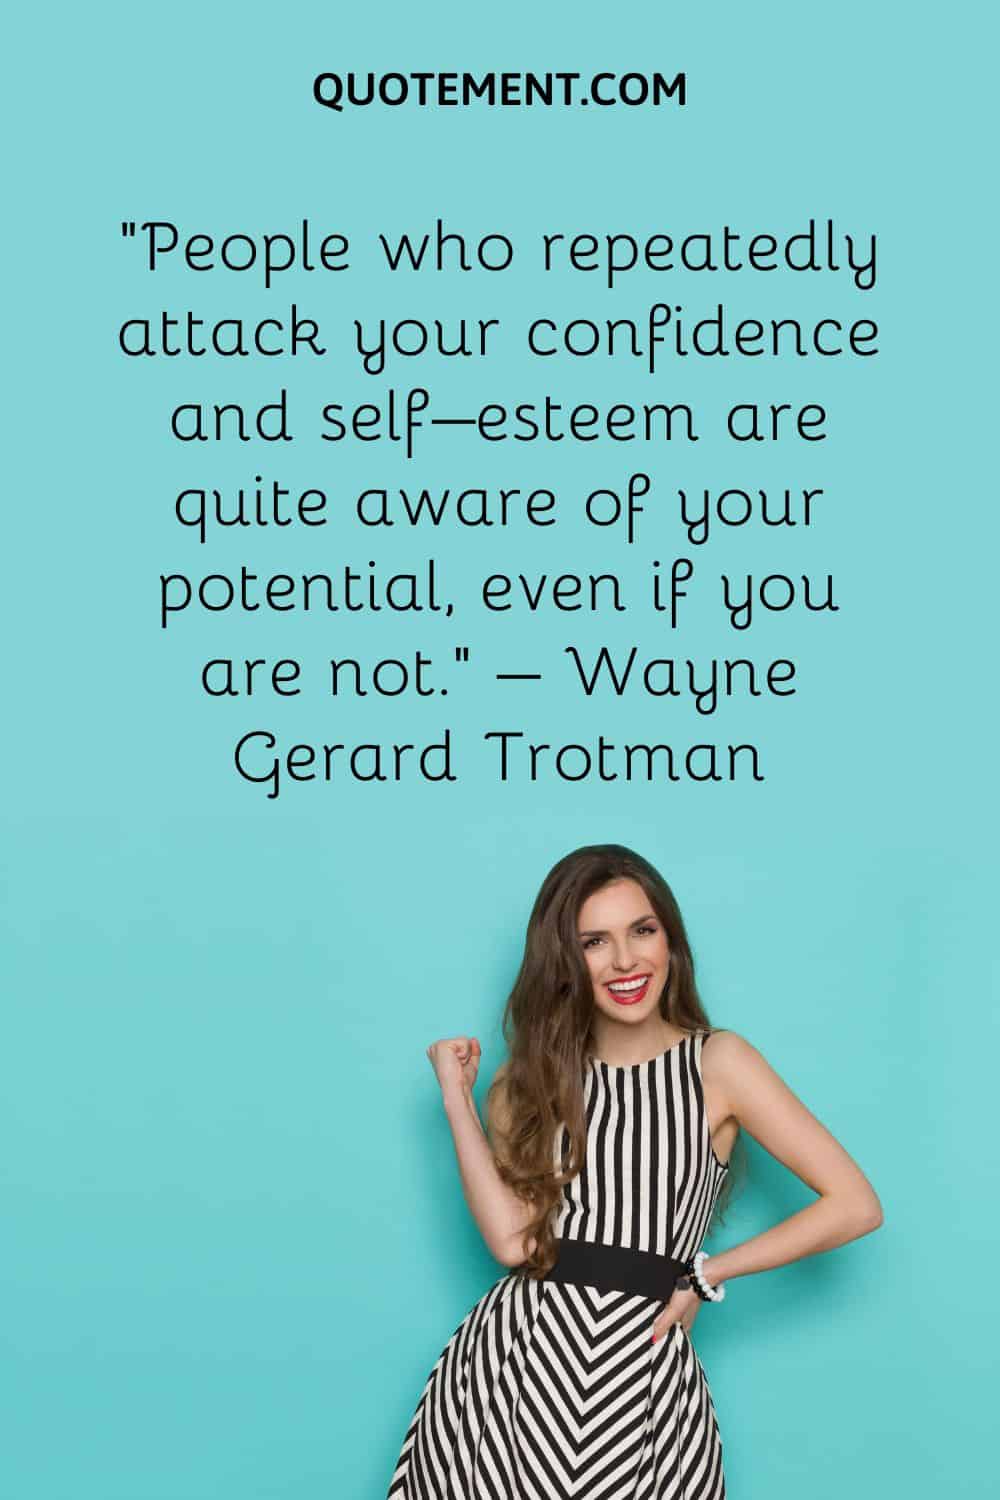 People who repeatedly attack your confidence and self–esteem are quite aware of your potential, even if you are not